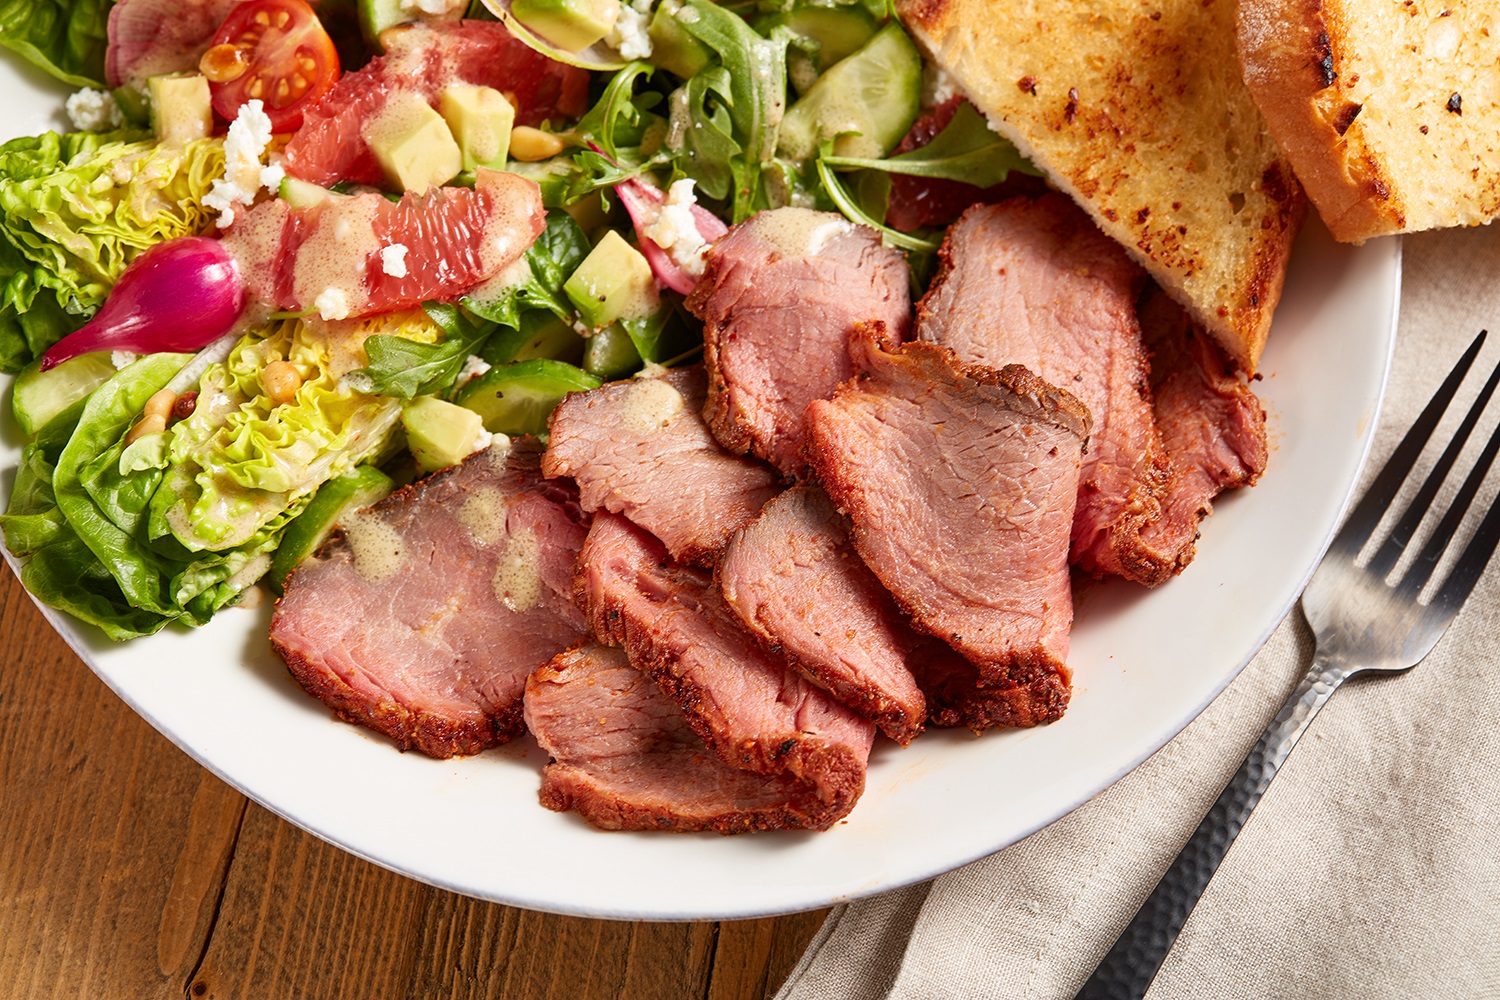 New Mexican Farmhouse Salad with Chimayo Chile-Rubbed and Sous Vide Australian Grass-Fed Striploin